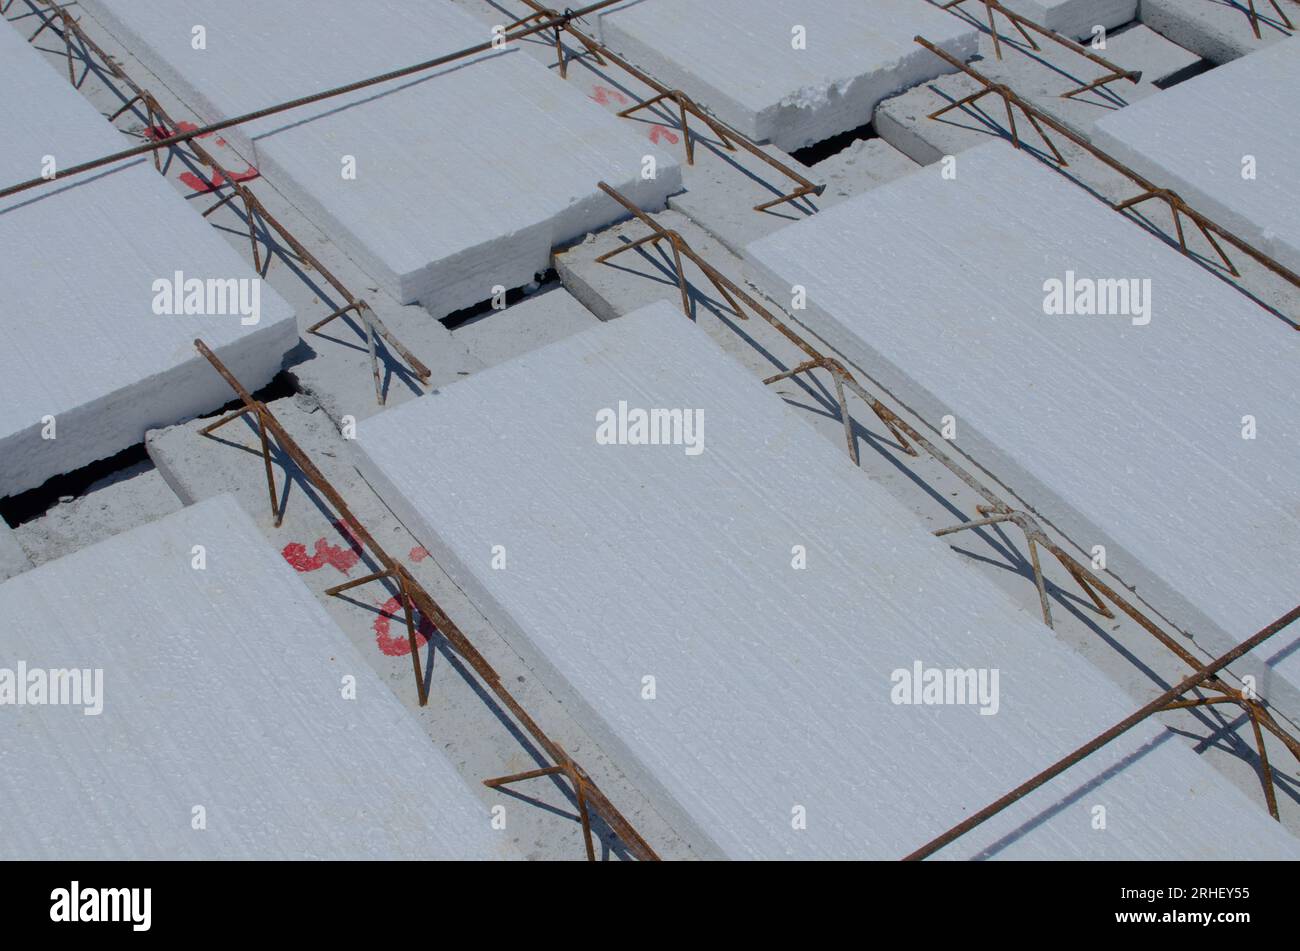 Detail of the construction of a Styrofoam slab in Brazil, a light and efficient option for thermal insulation. Styrofoam slab, sustainable and economi Stock Photo